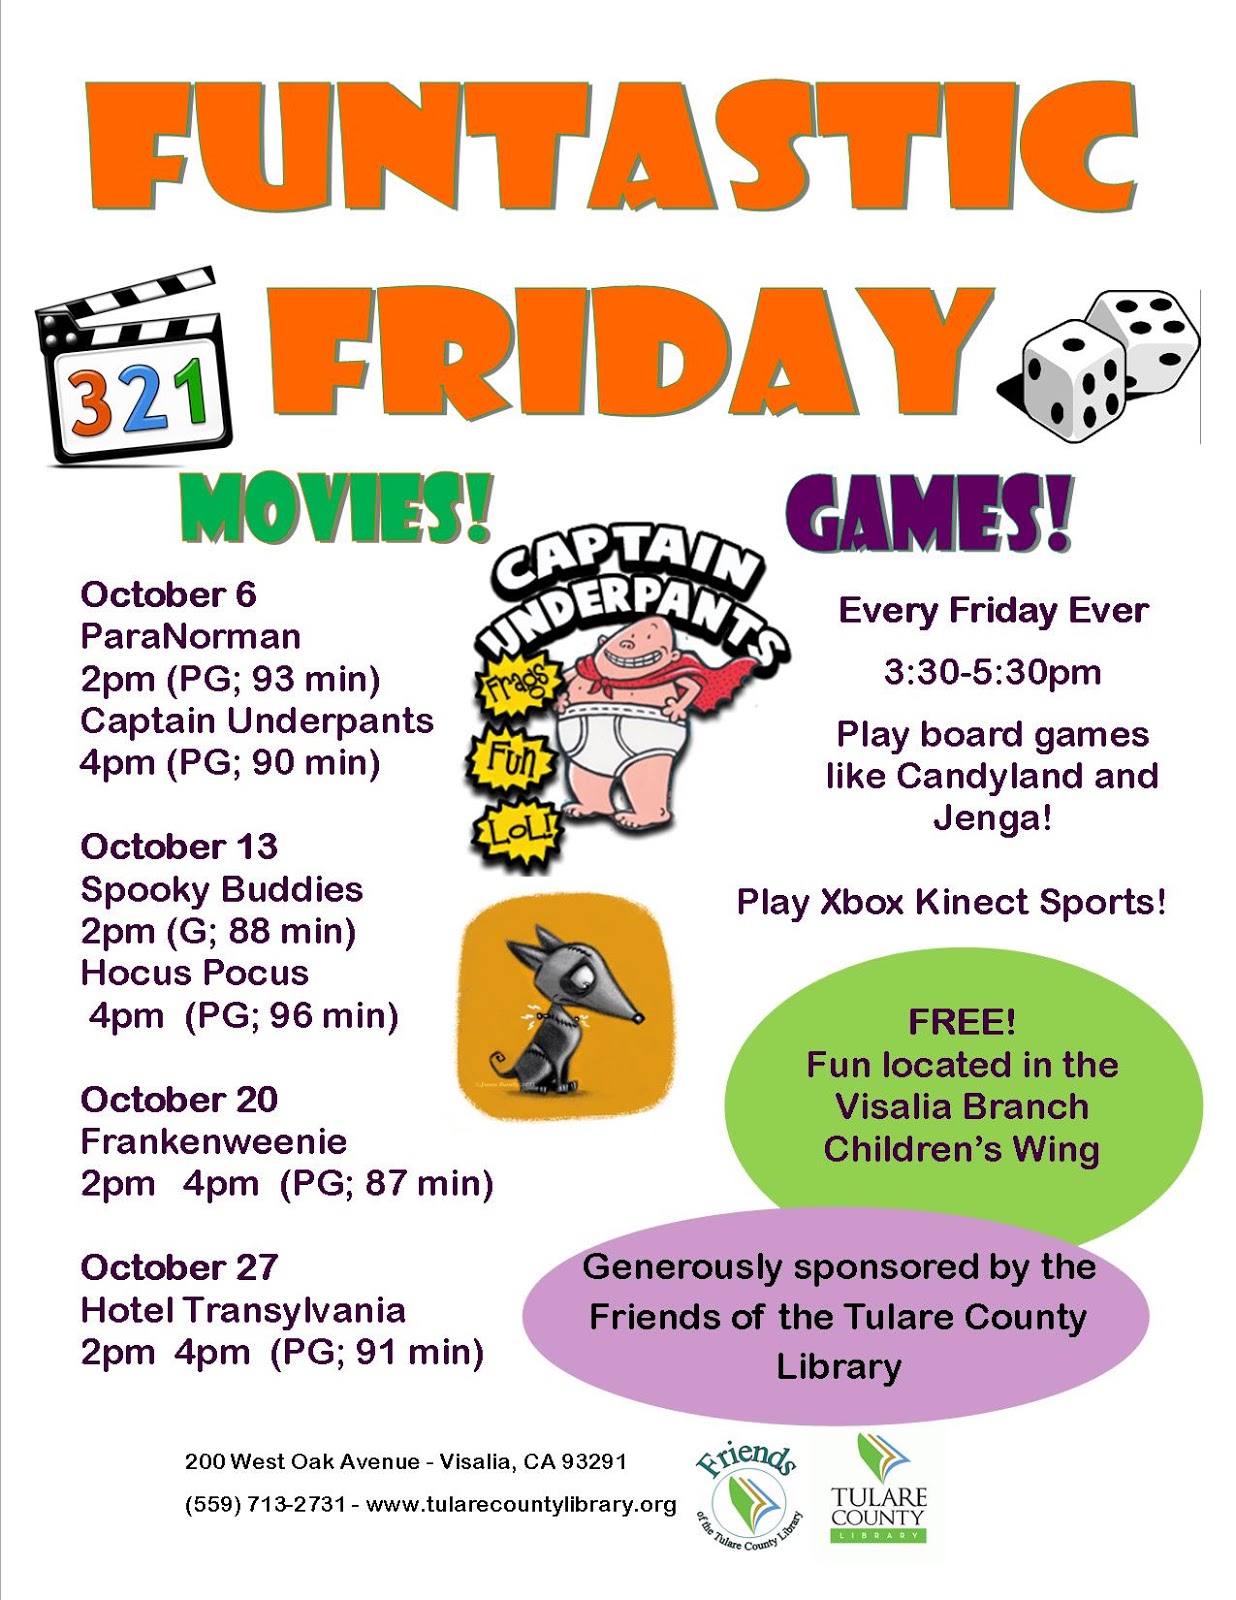 Tulare County Library News and Events Funtastic Fun Fridays in October